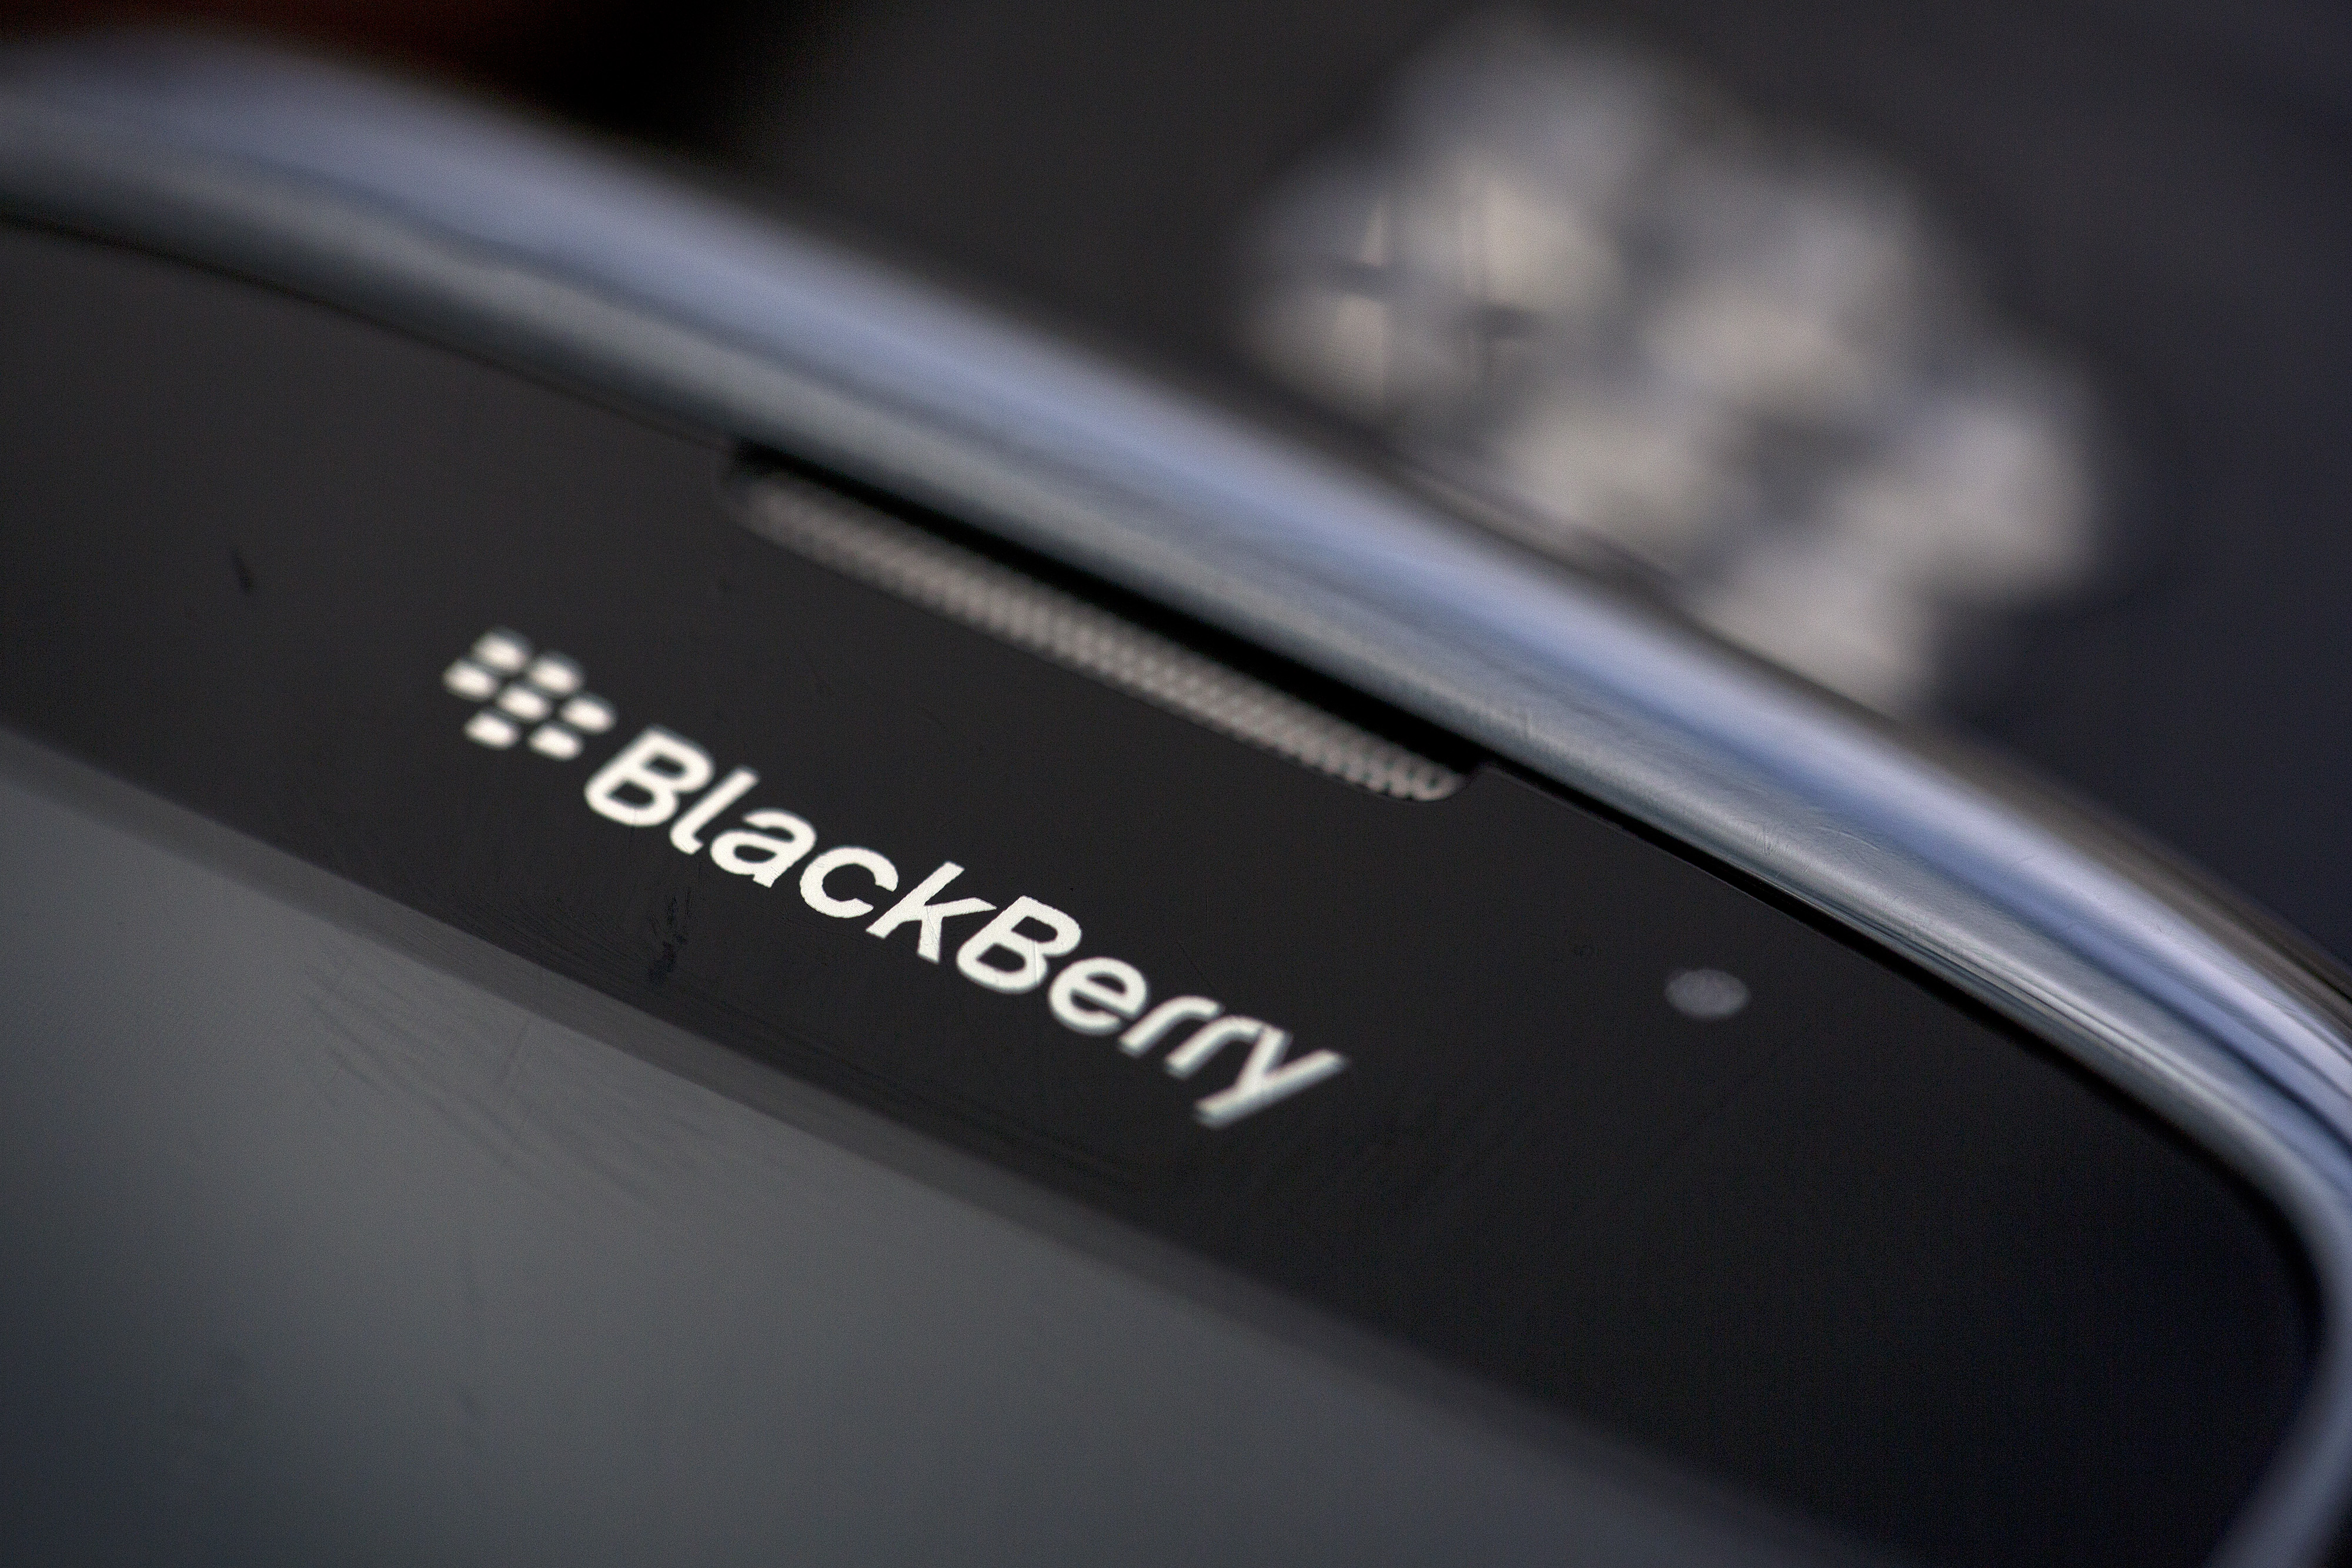 The BlackBerry logo is seen on the screen of a BlackBerry Curve smartphone, produced by BlackBerry Ltd., in this arranged photograph taken in London, U.K., on Monday, Sept. 23, 2013. (Simon Dawson—Bloomberg/Getty Images)